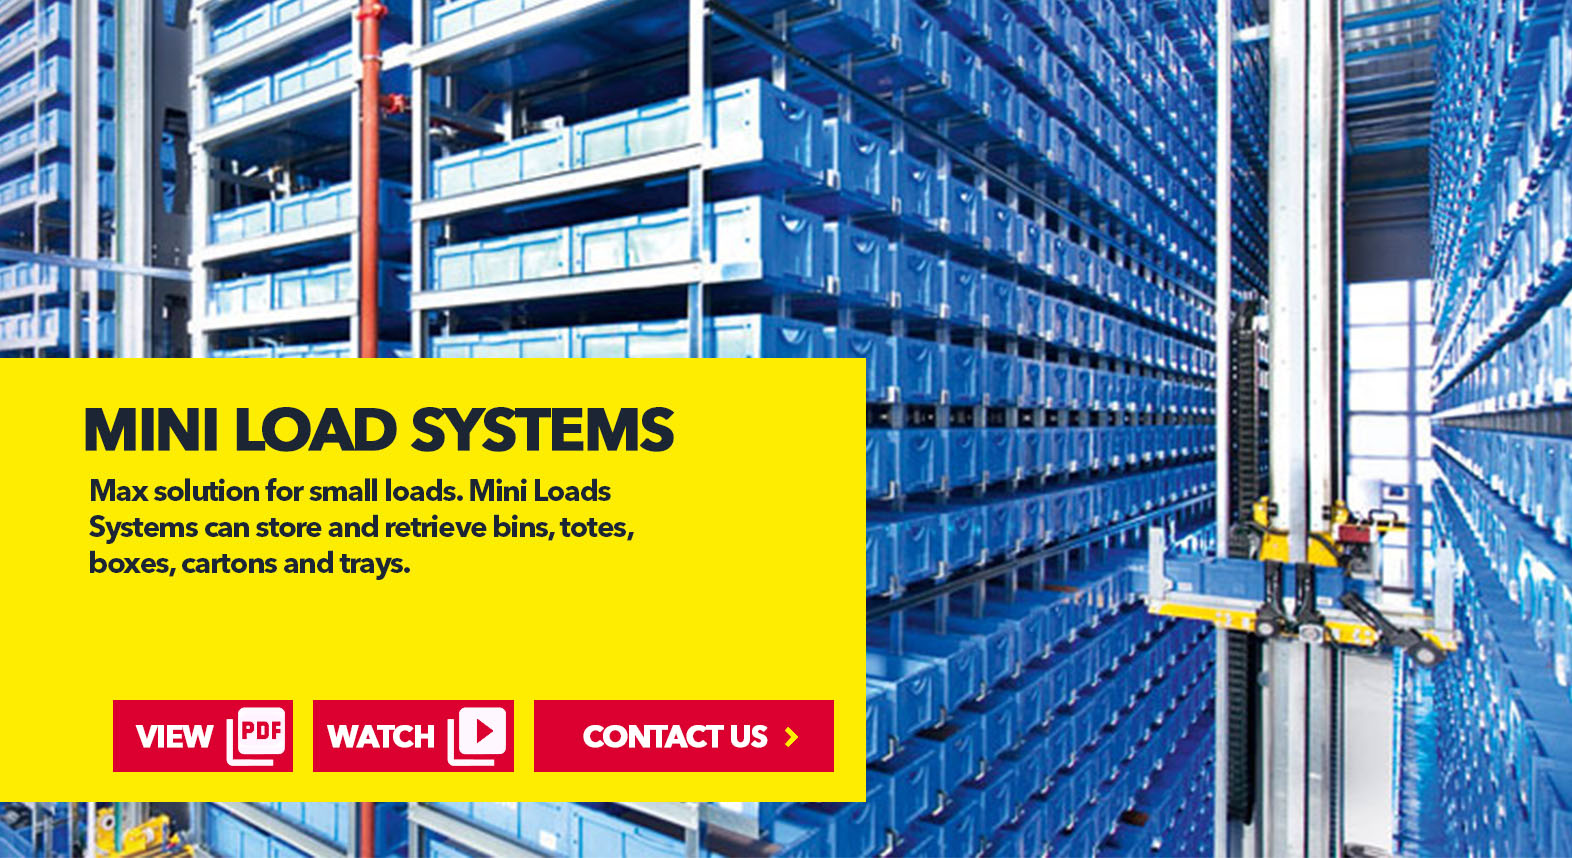 Mini-Load Systems by SSI Schaefer USA. Shop Now. Contact Us. www.chaefershelving.com